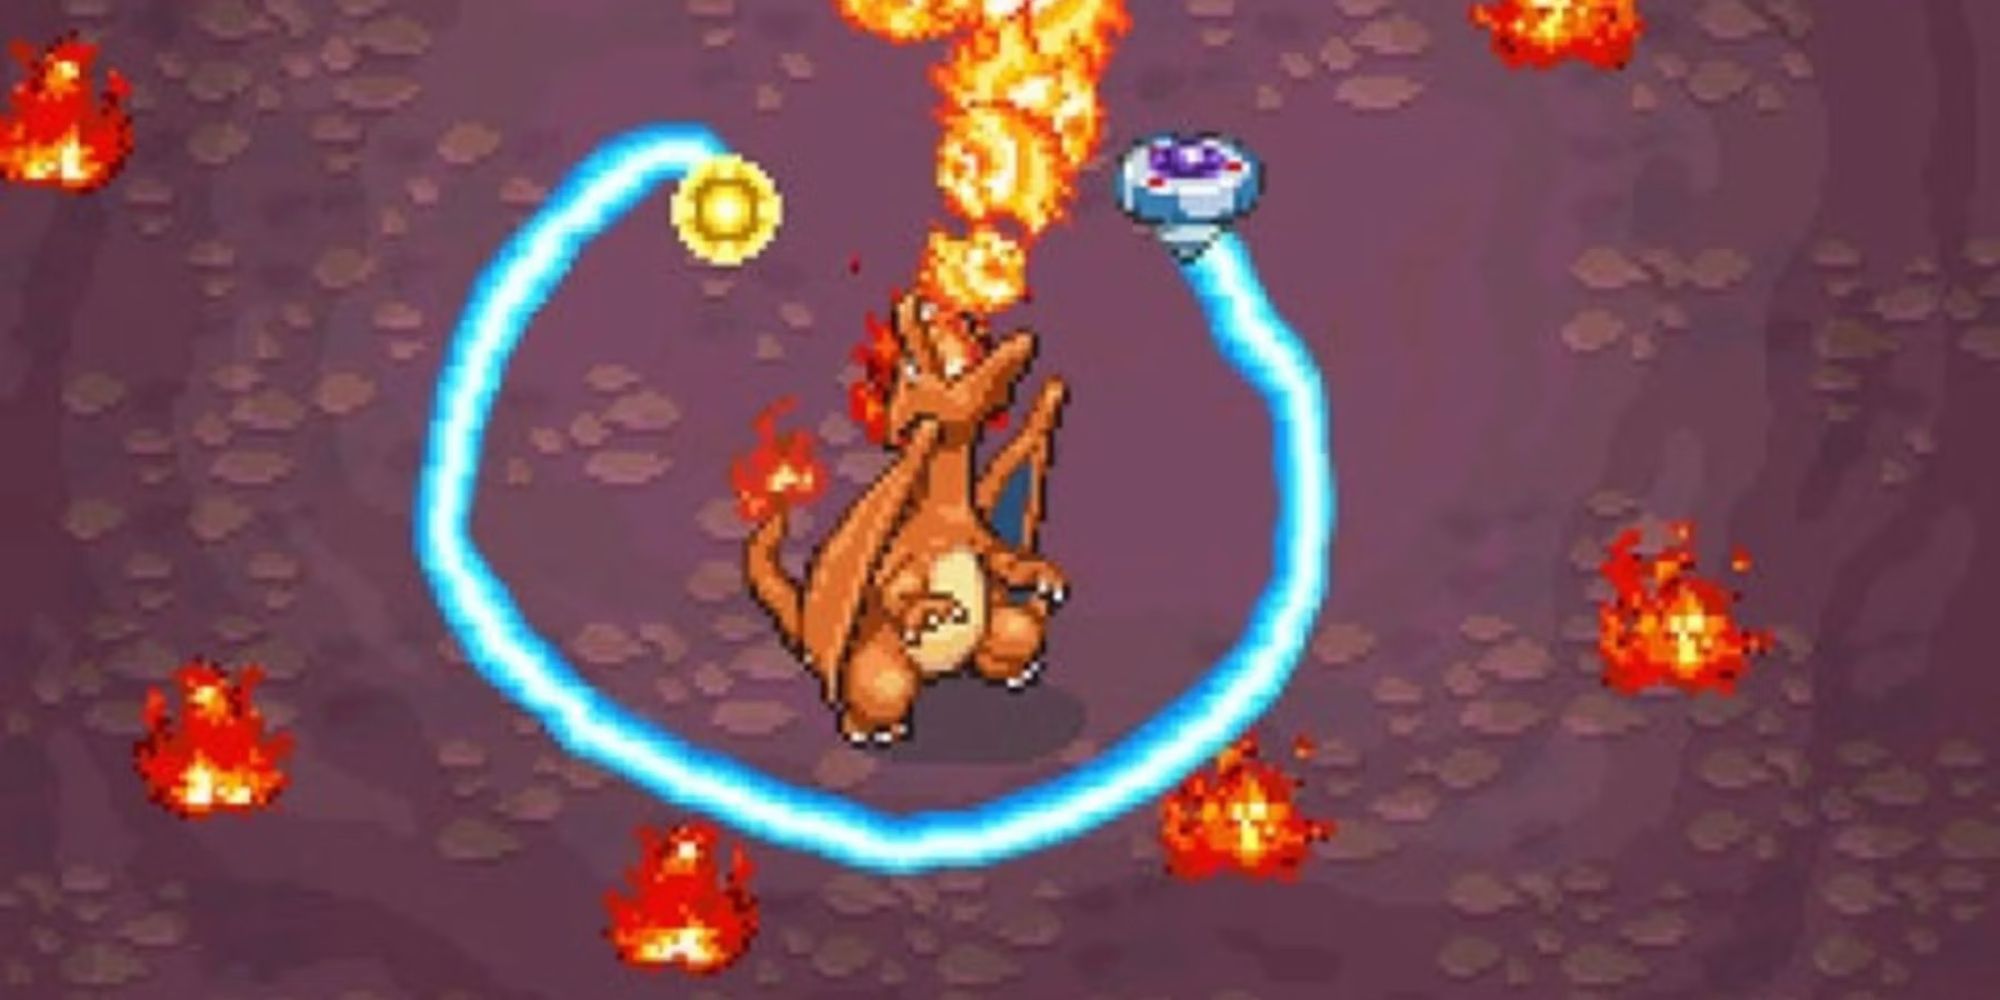 Charizard breathing fire into the air while a player attempt to loop around them.